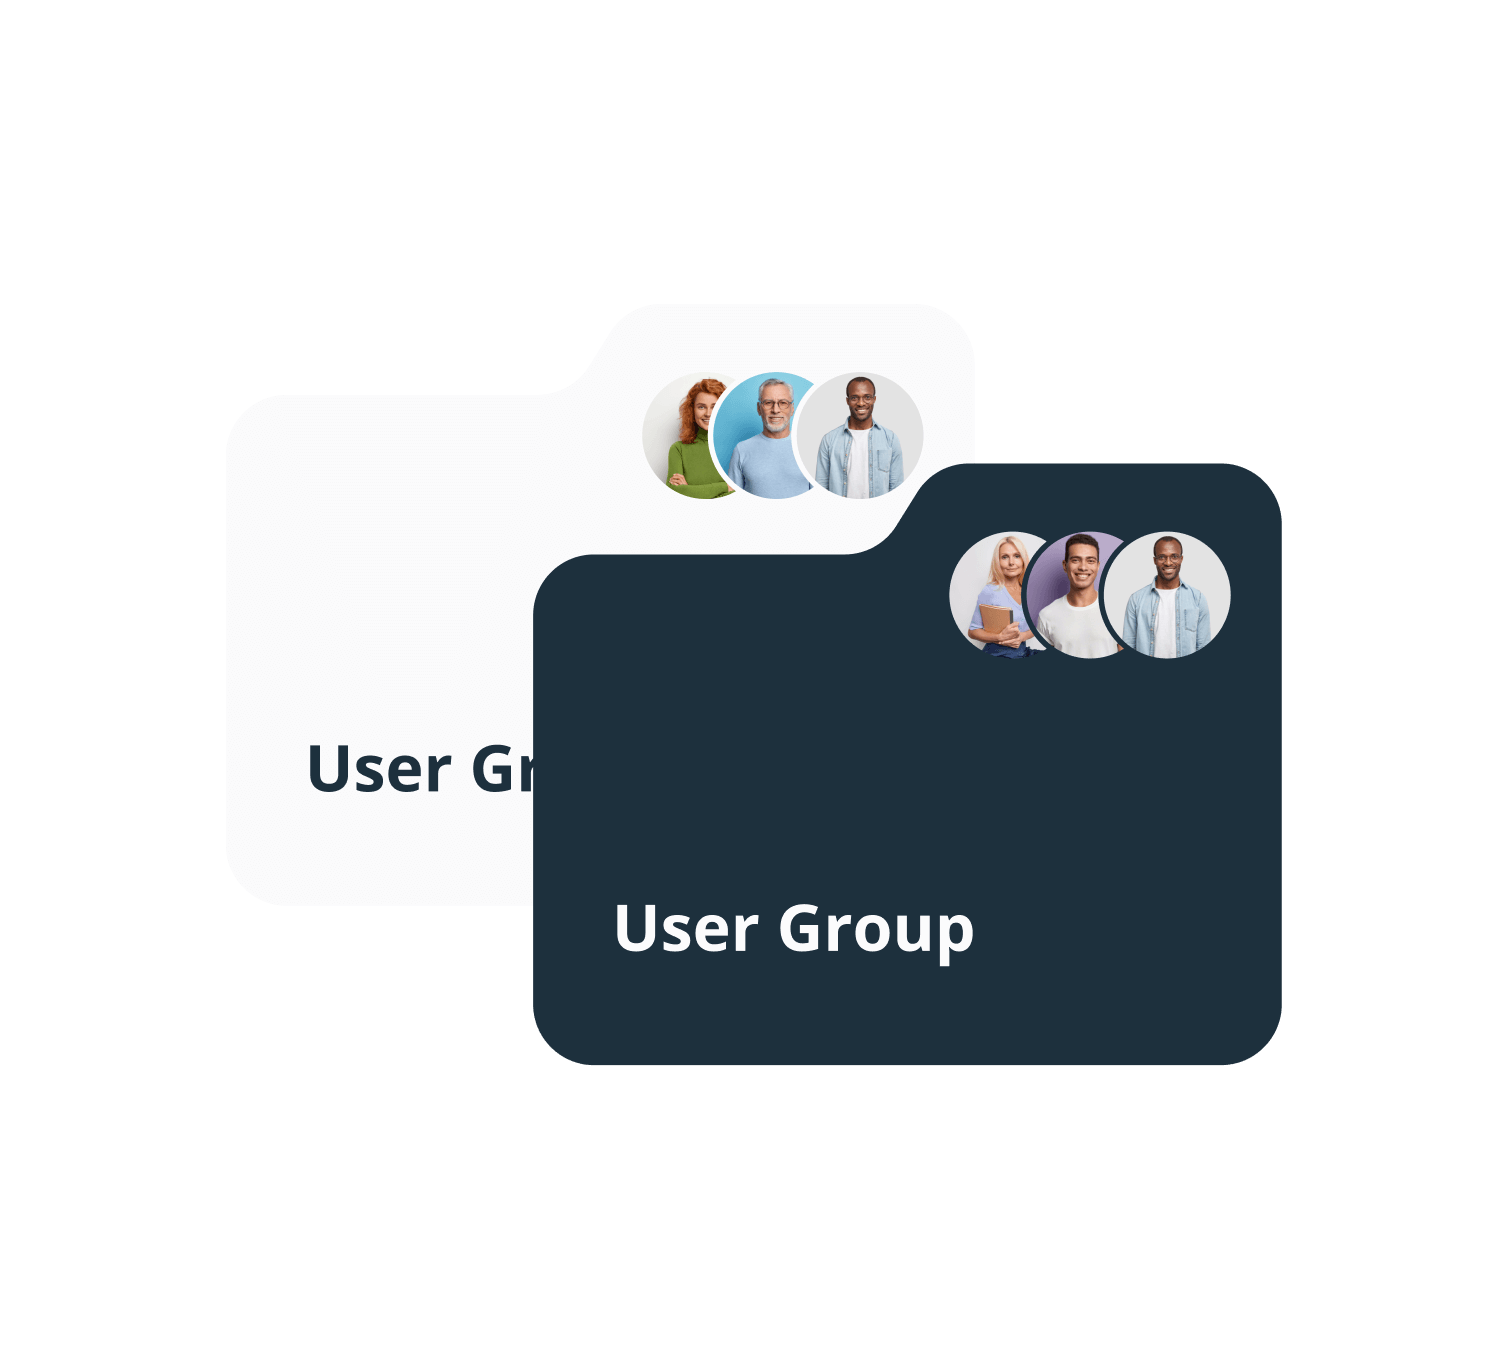 user groups